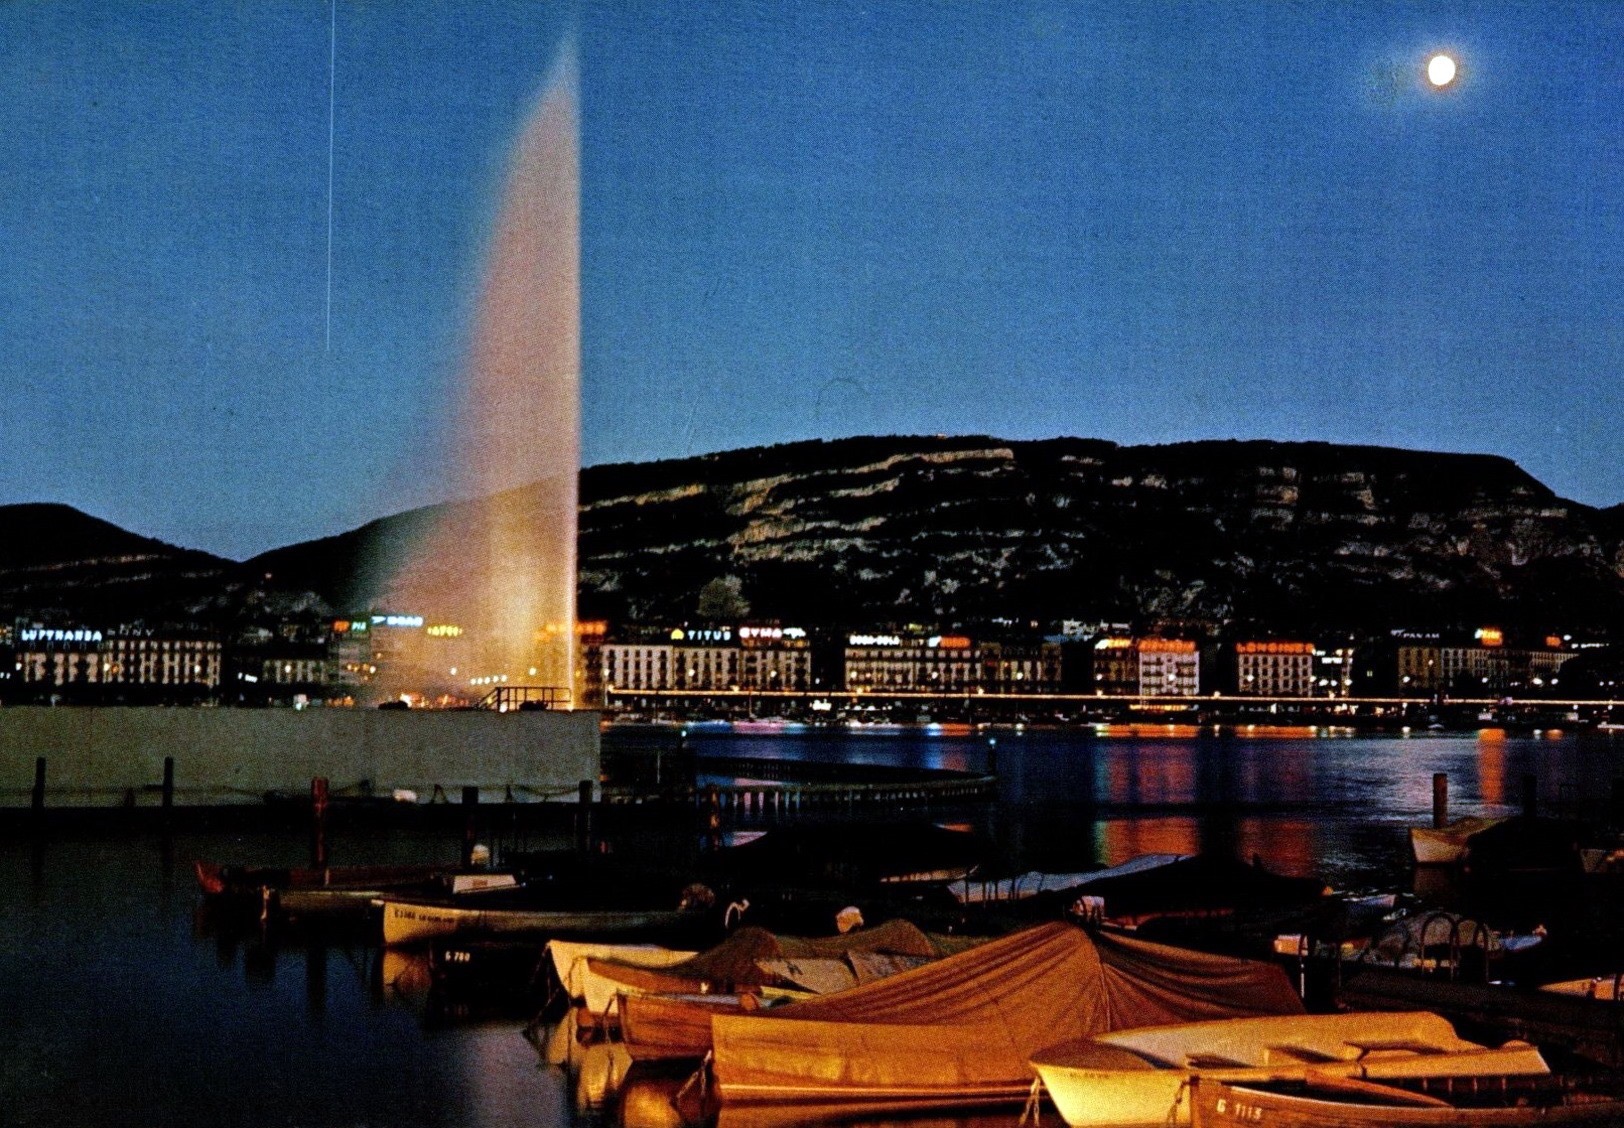 Vintage postcard of Geneva with a view of the Jet d’Eau and the Salève by moonlight.